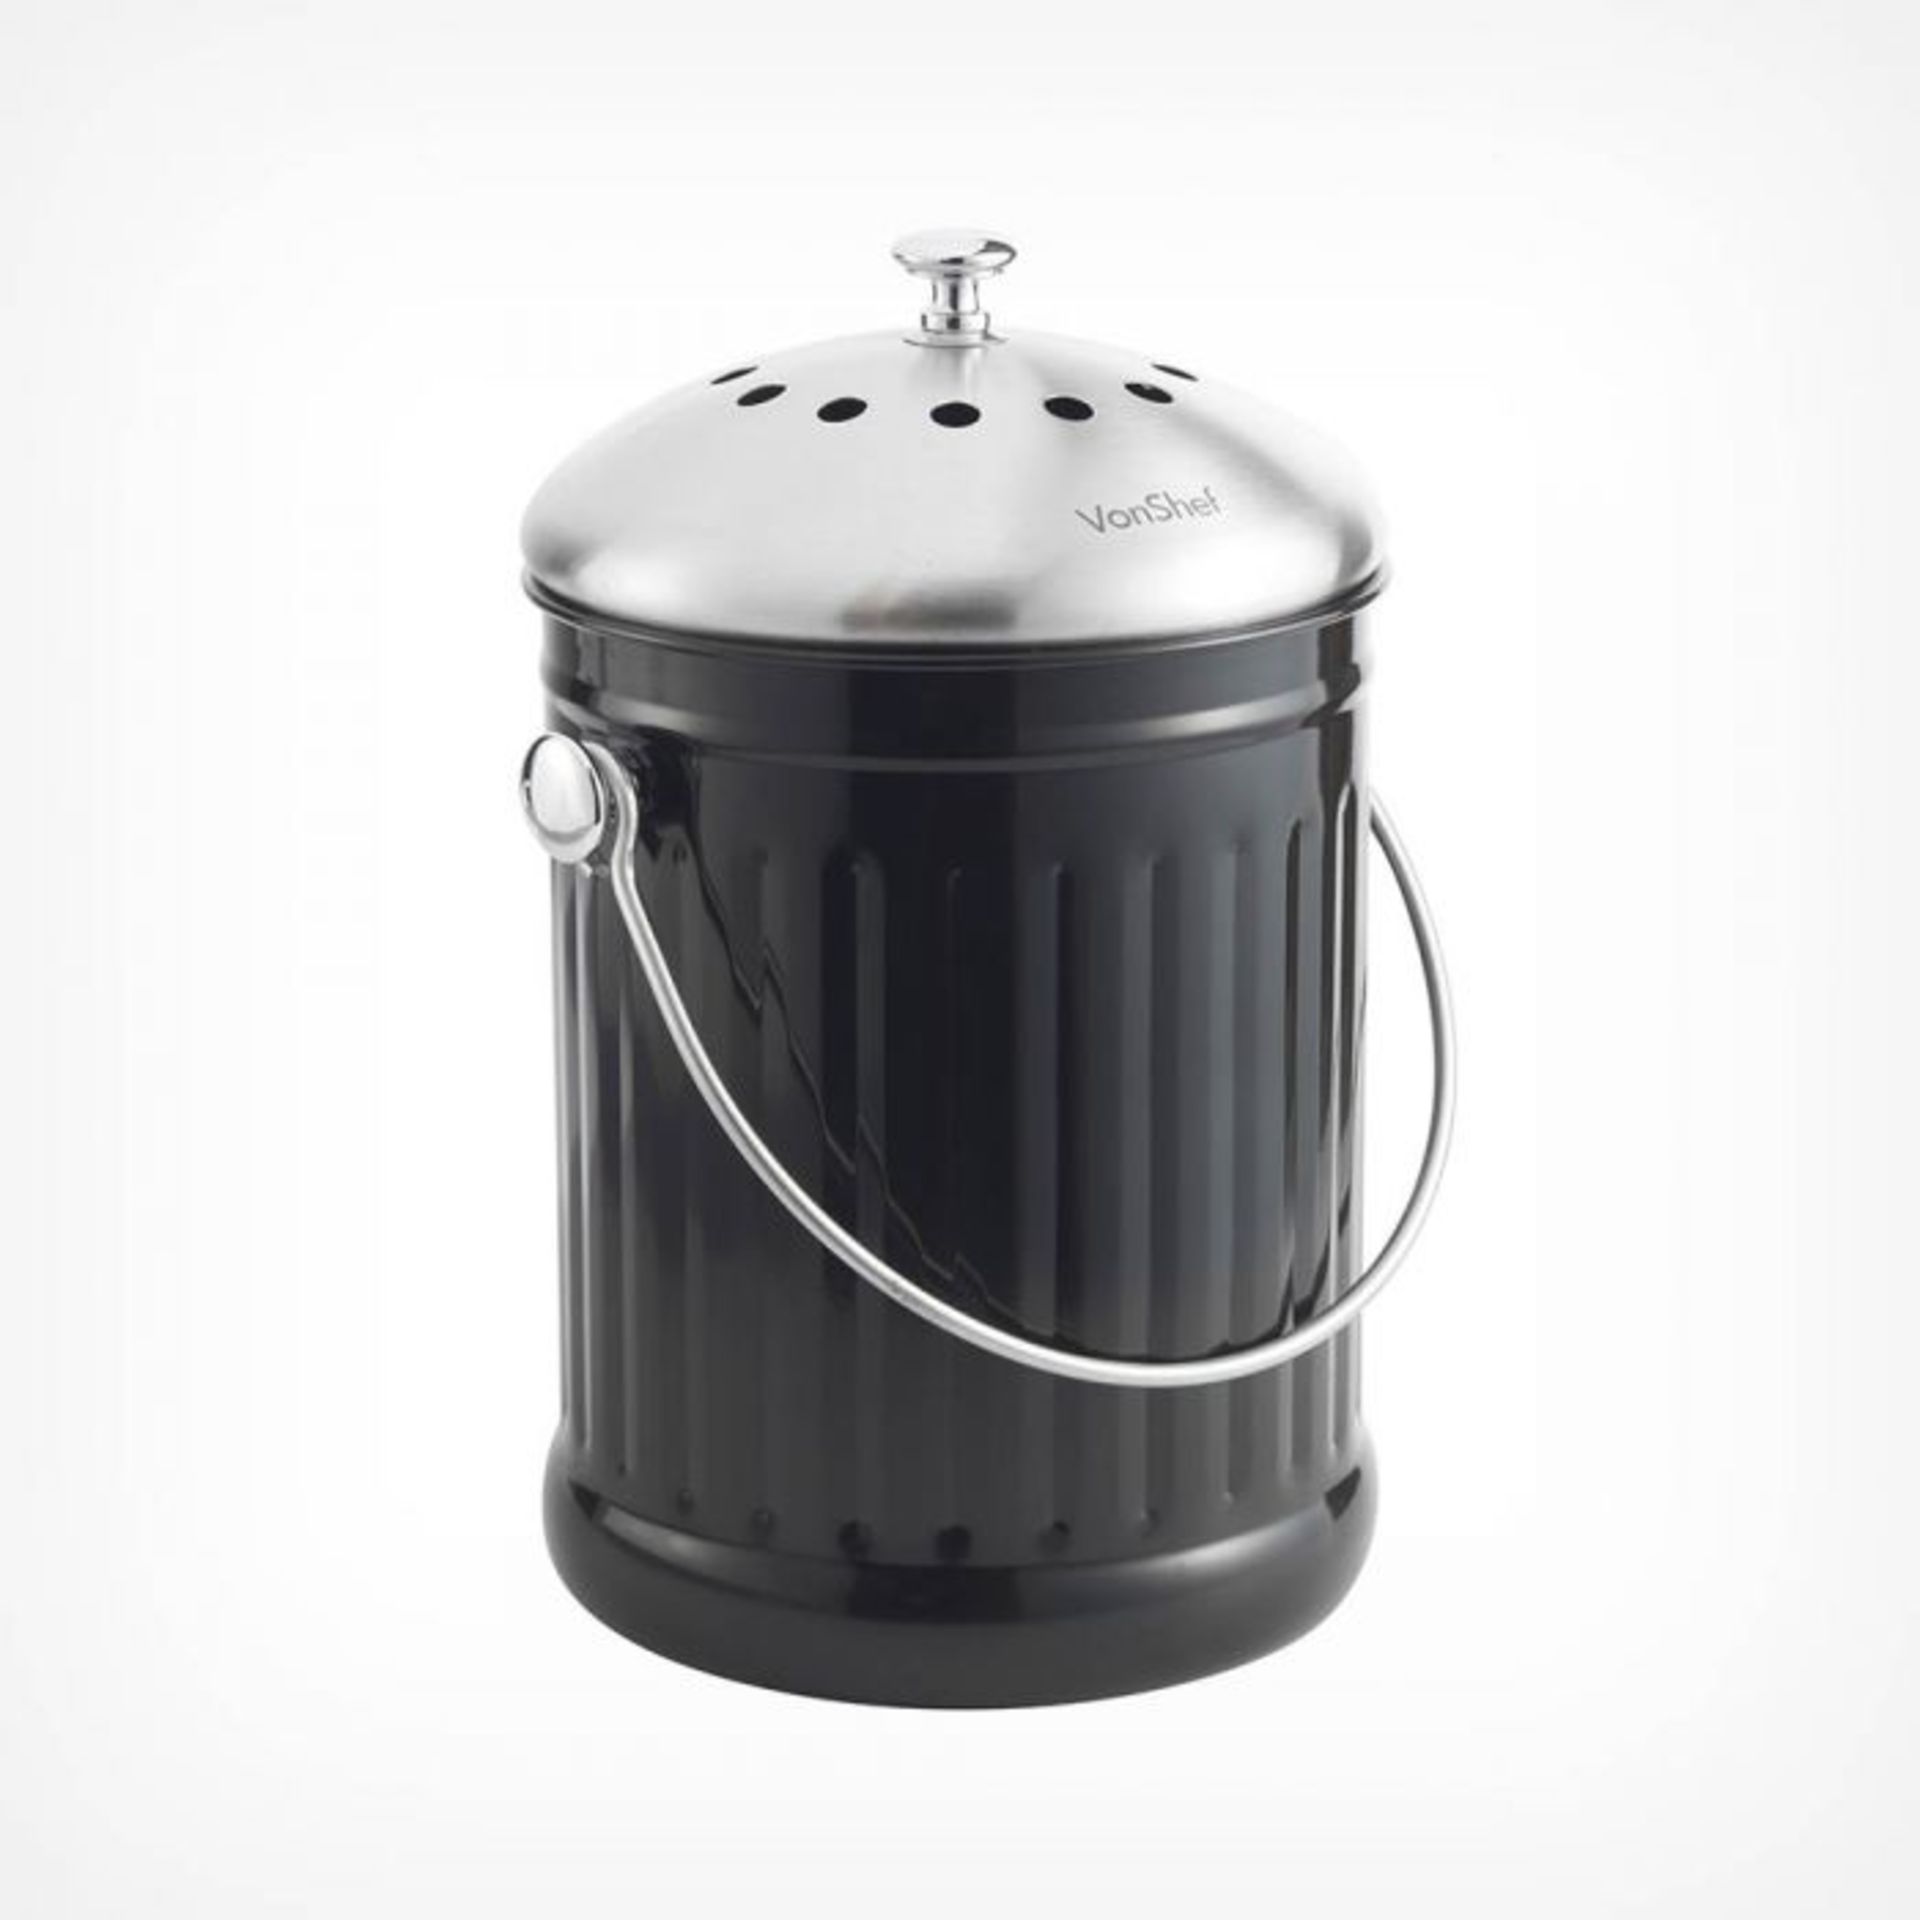 6 X BRAND NEW 4.5L COMPOST BIN AND FILTER, More and more of us are recycling our kitchen waste to